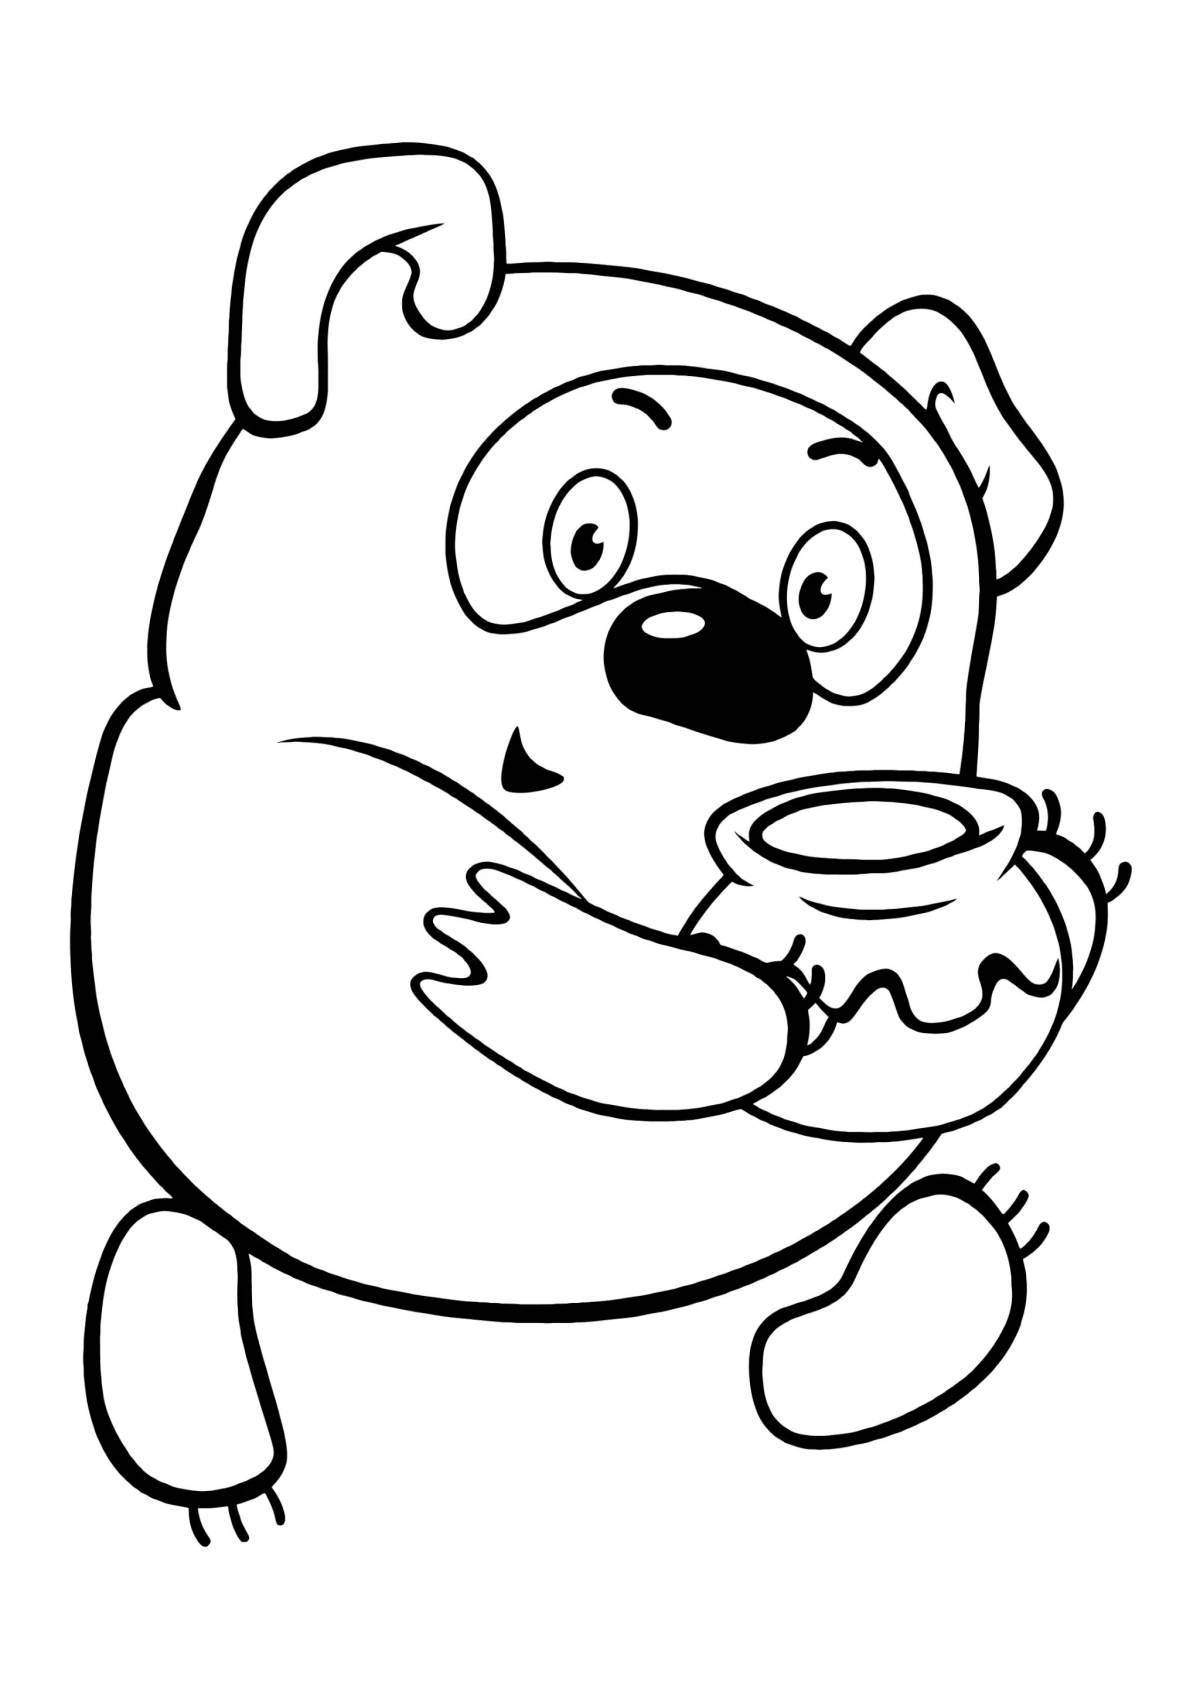 Rampant Winnie the Pooh coloring page